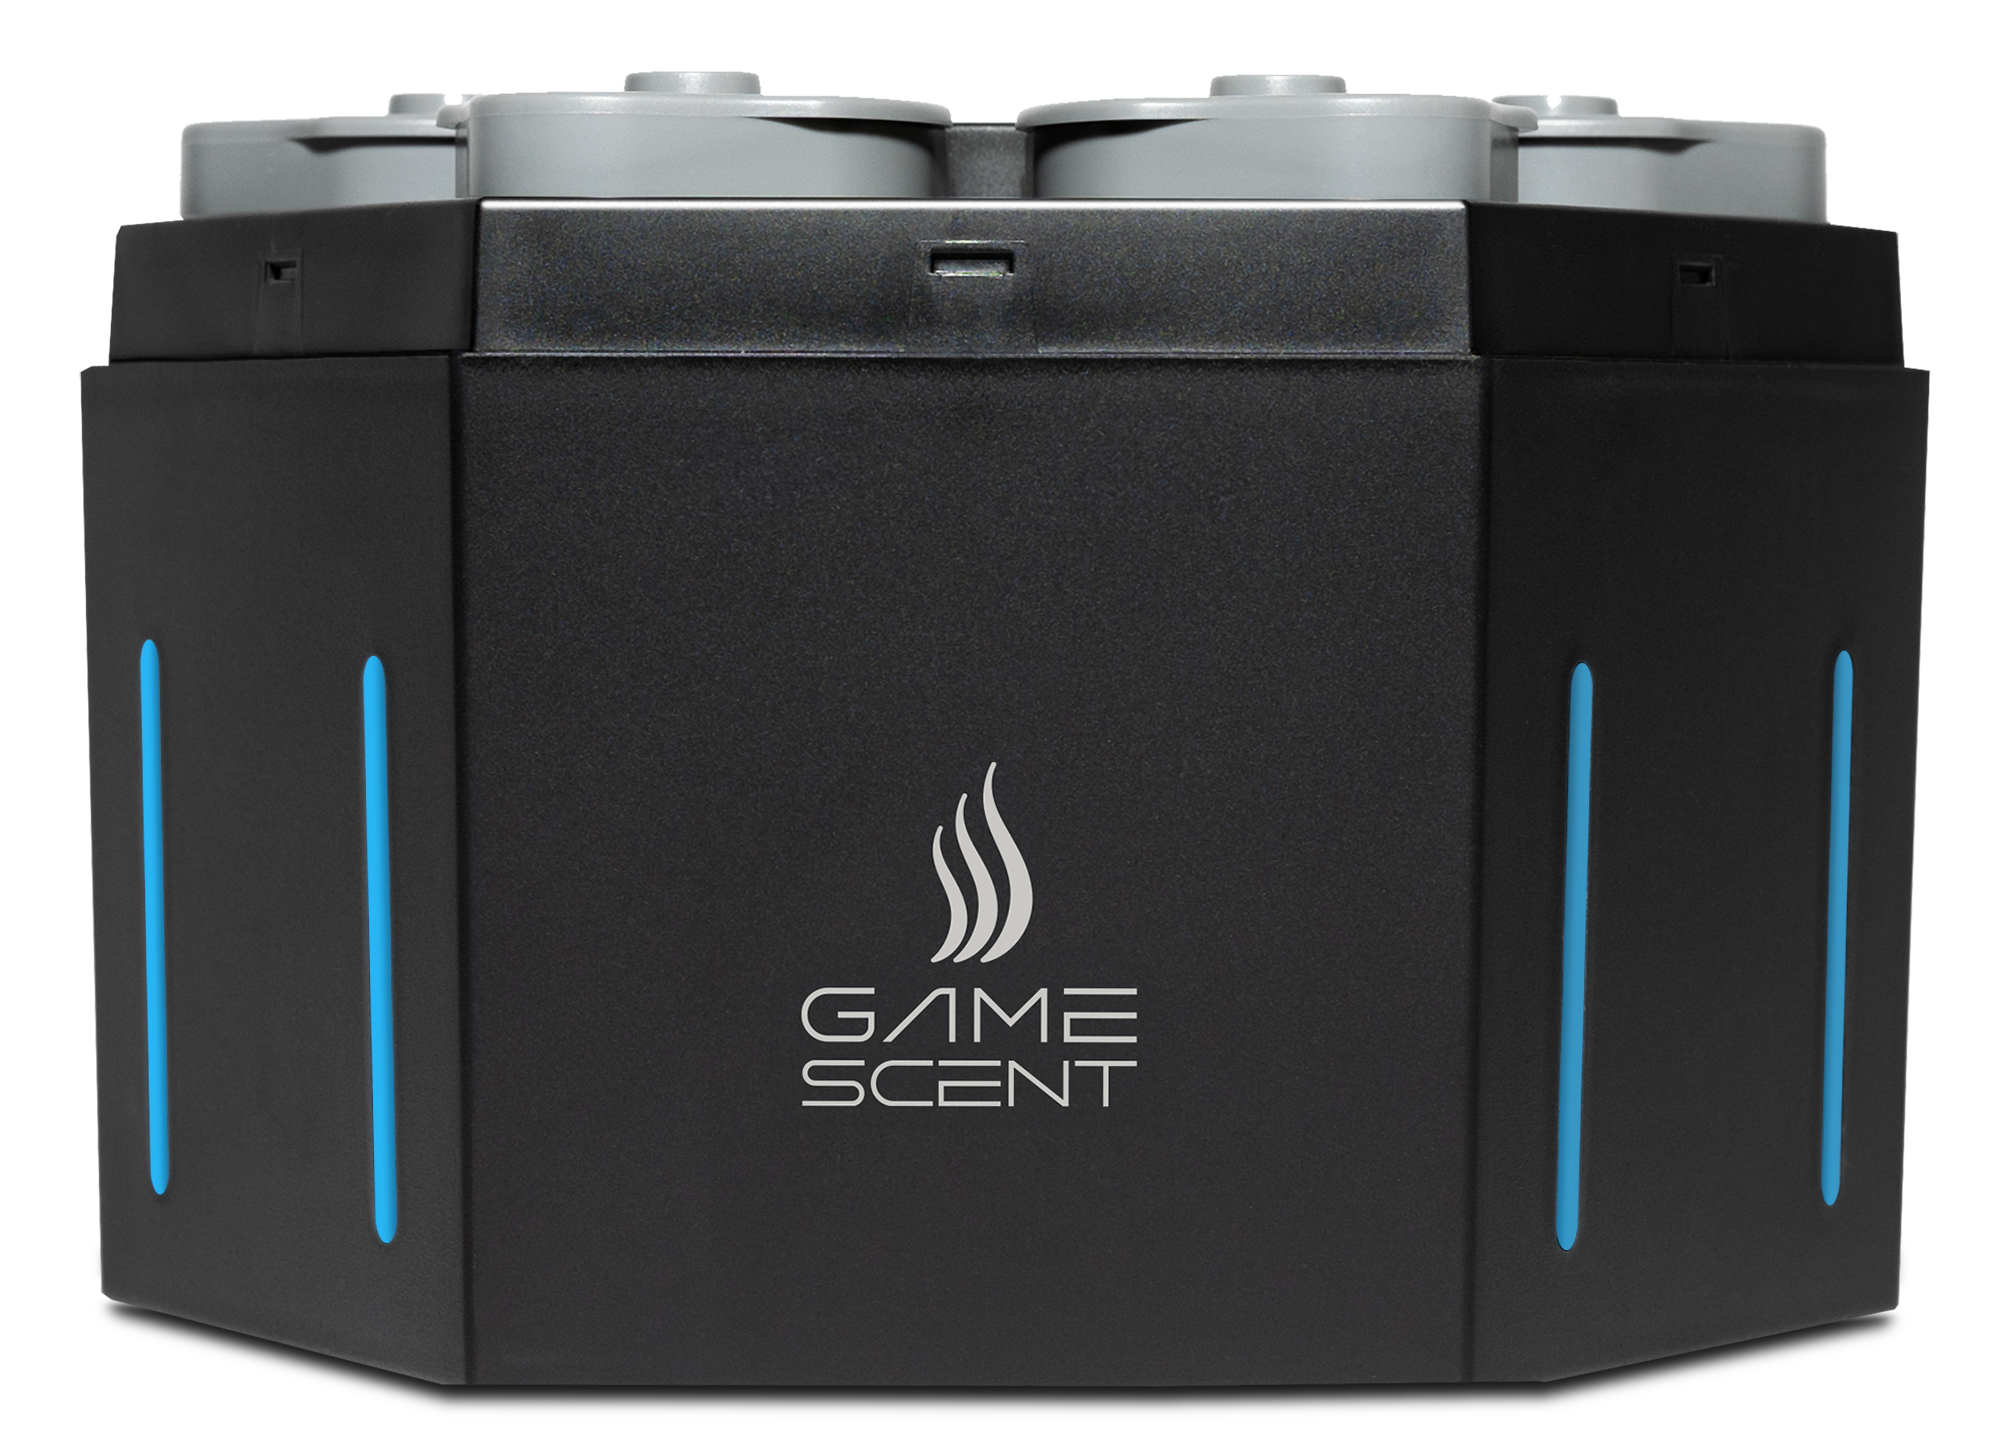 GameScent promo image - front-facing picture of atomizer